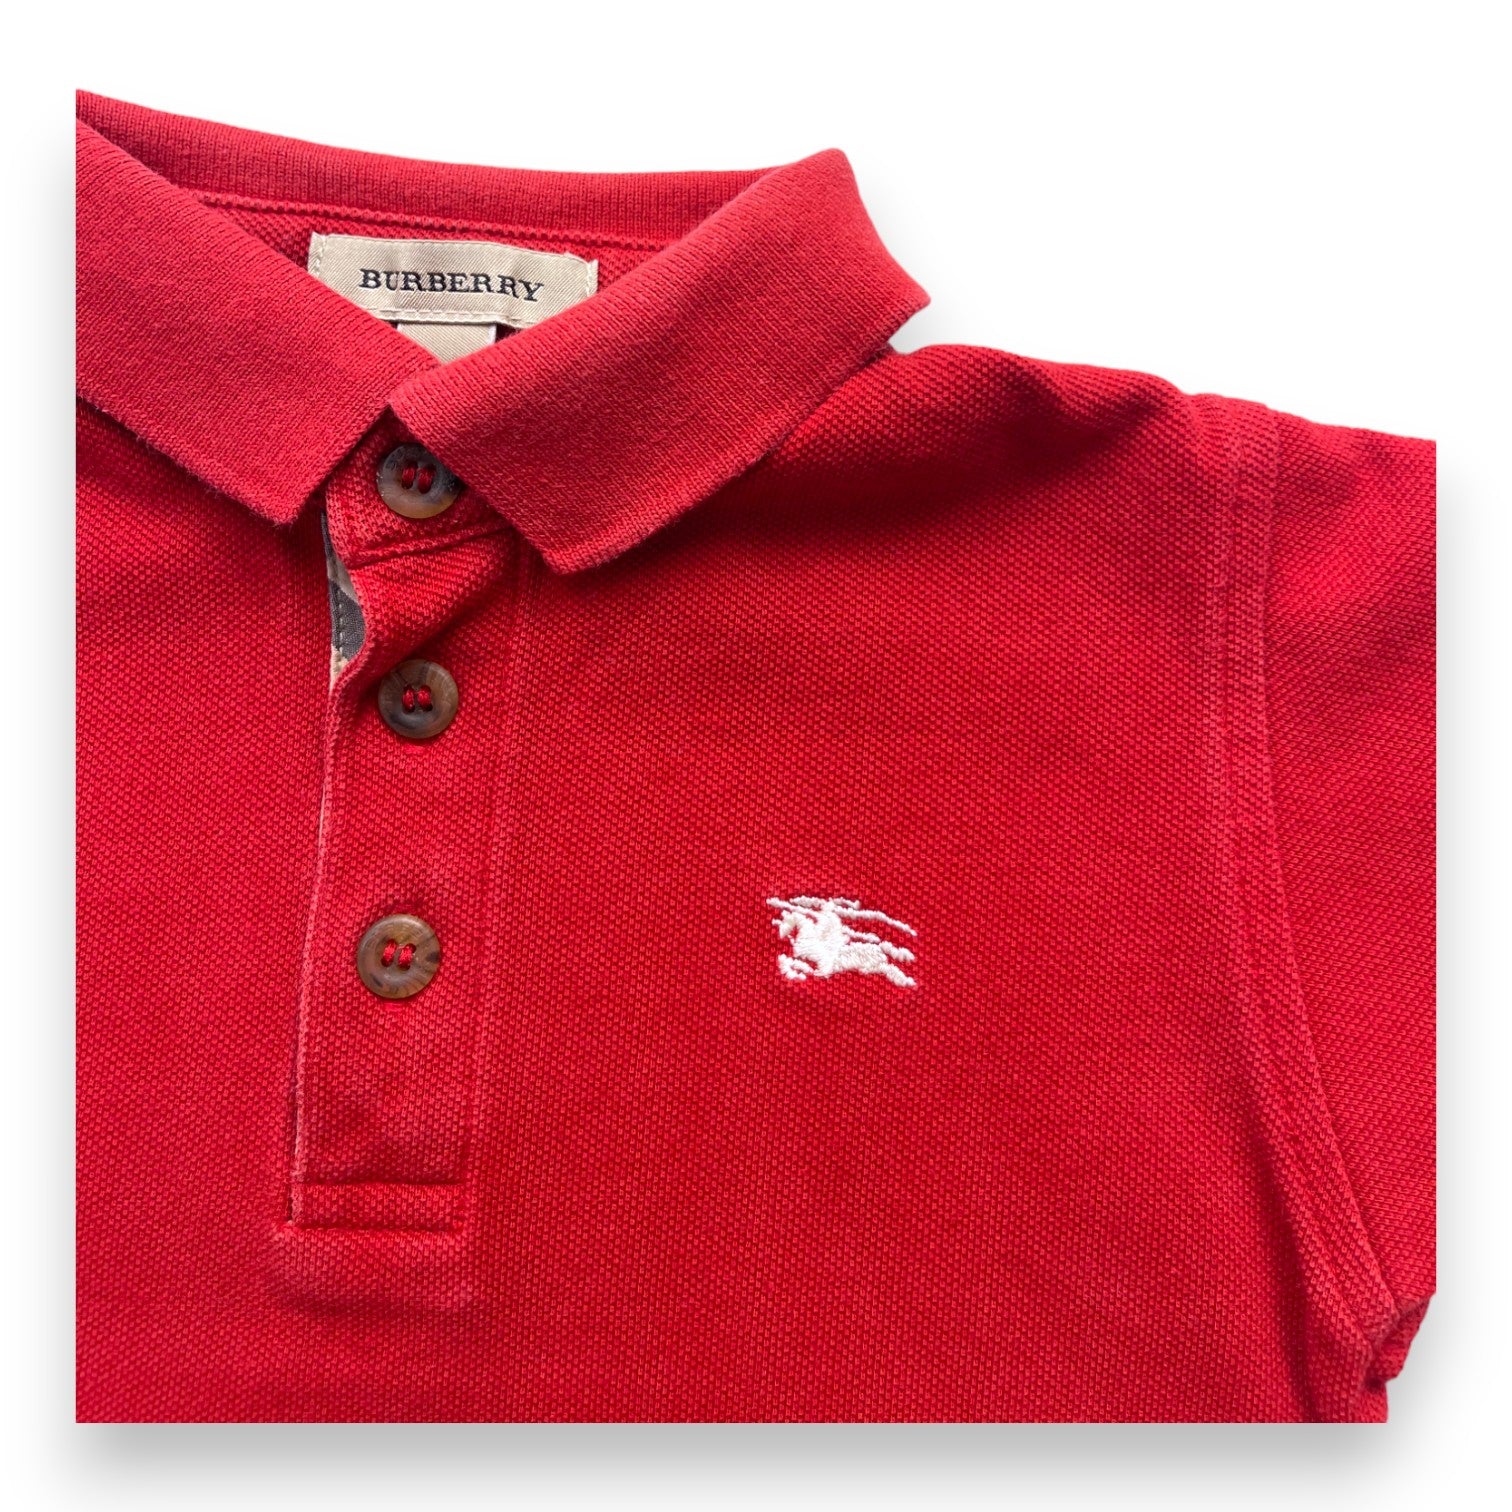 BURBERRY - Polo manches courtes rouge - 12 mois